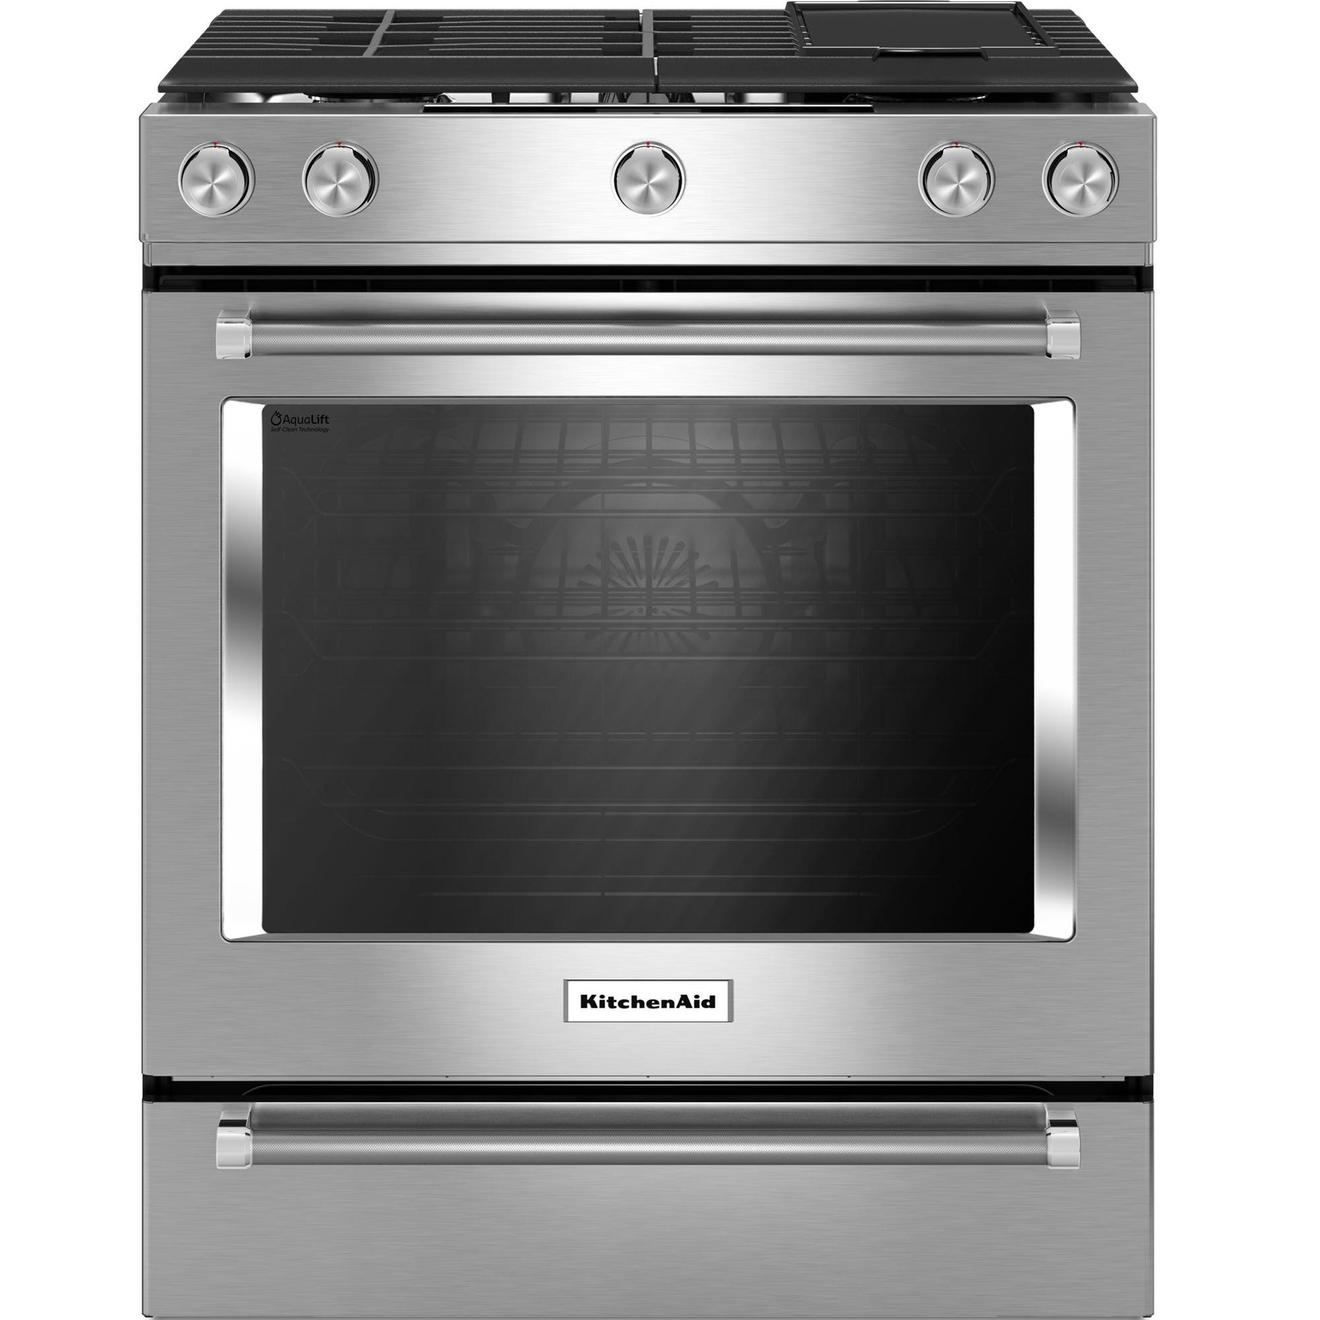 KitchenAid 30 inch Single Oven Gas Range offers at $2599.98 in Trail Appliances